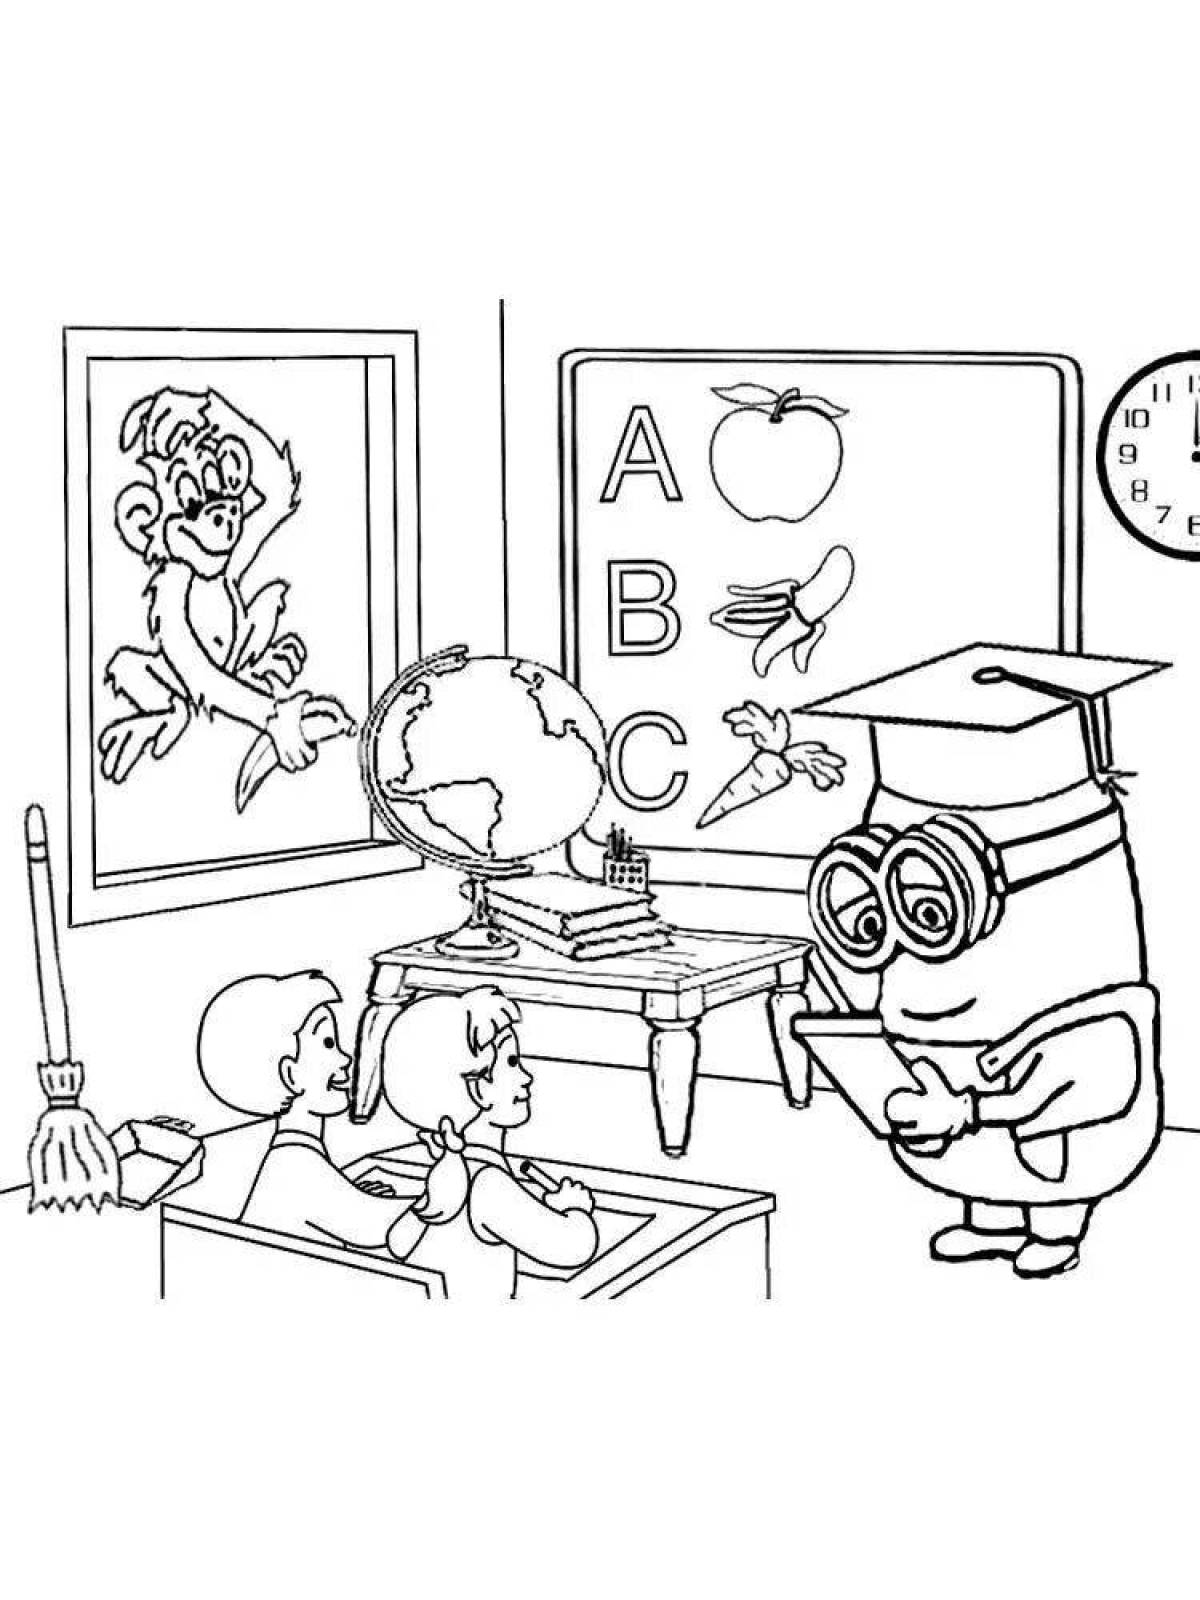 Class coloring page with color splatter